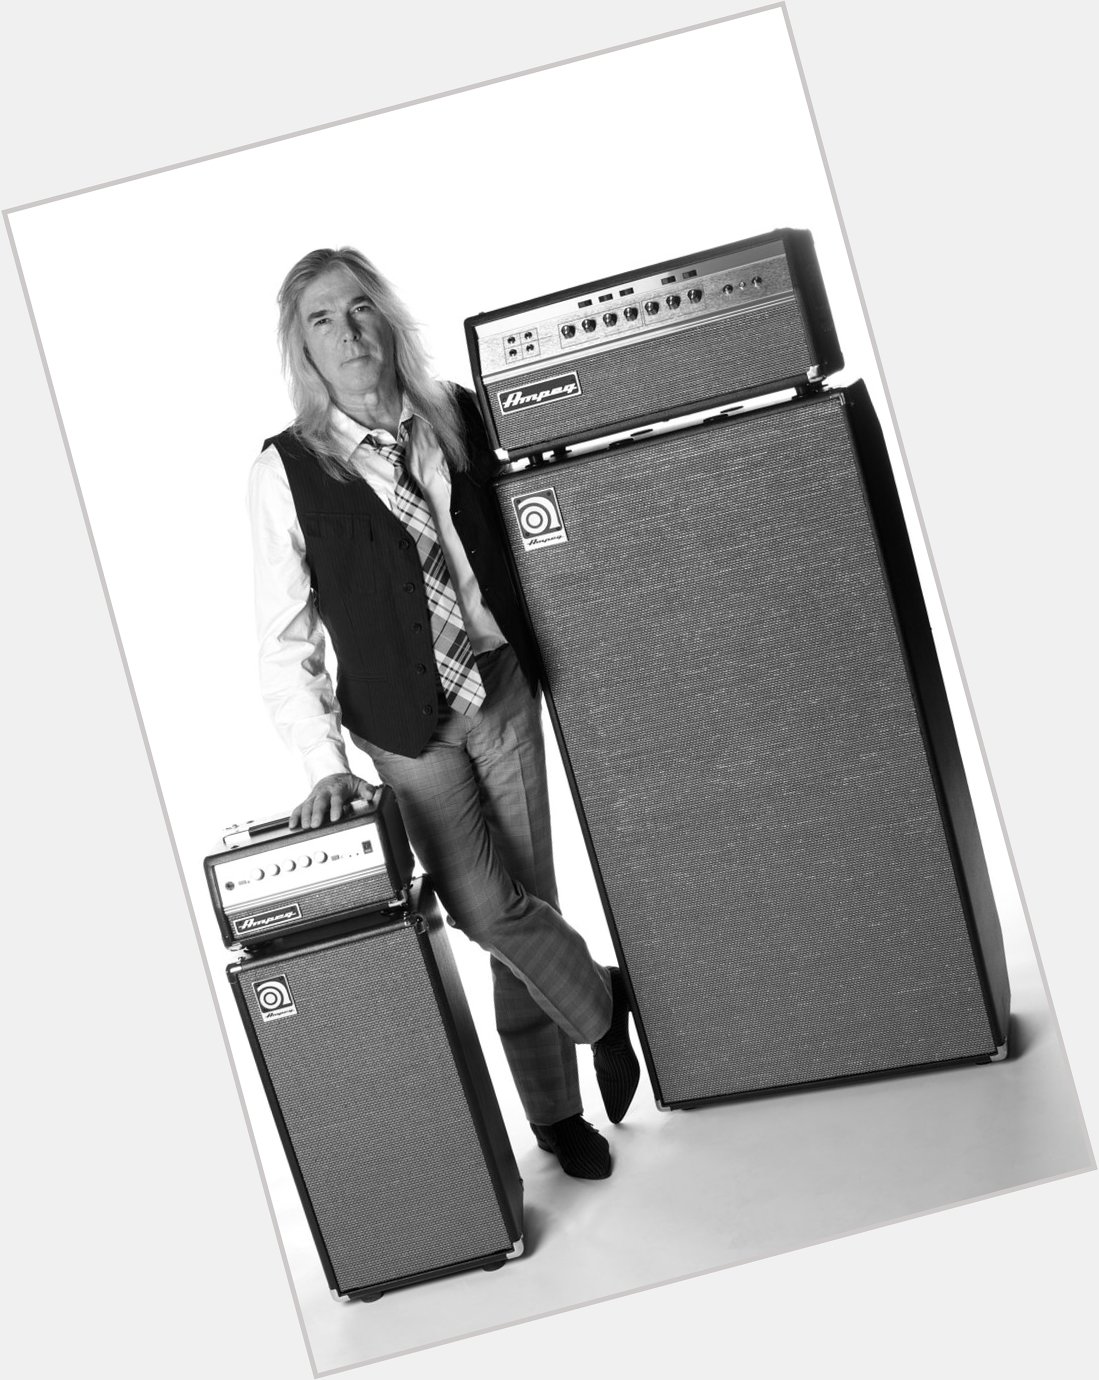 Join us in wishing Ampeg artist Cliff Williams a happy birthday today! 